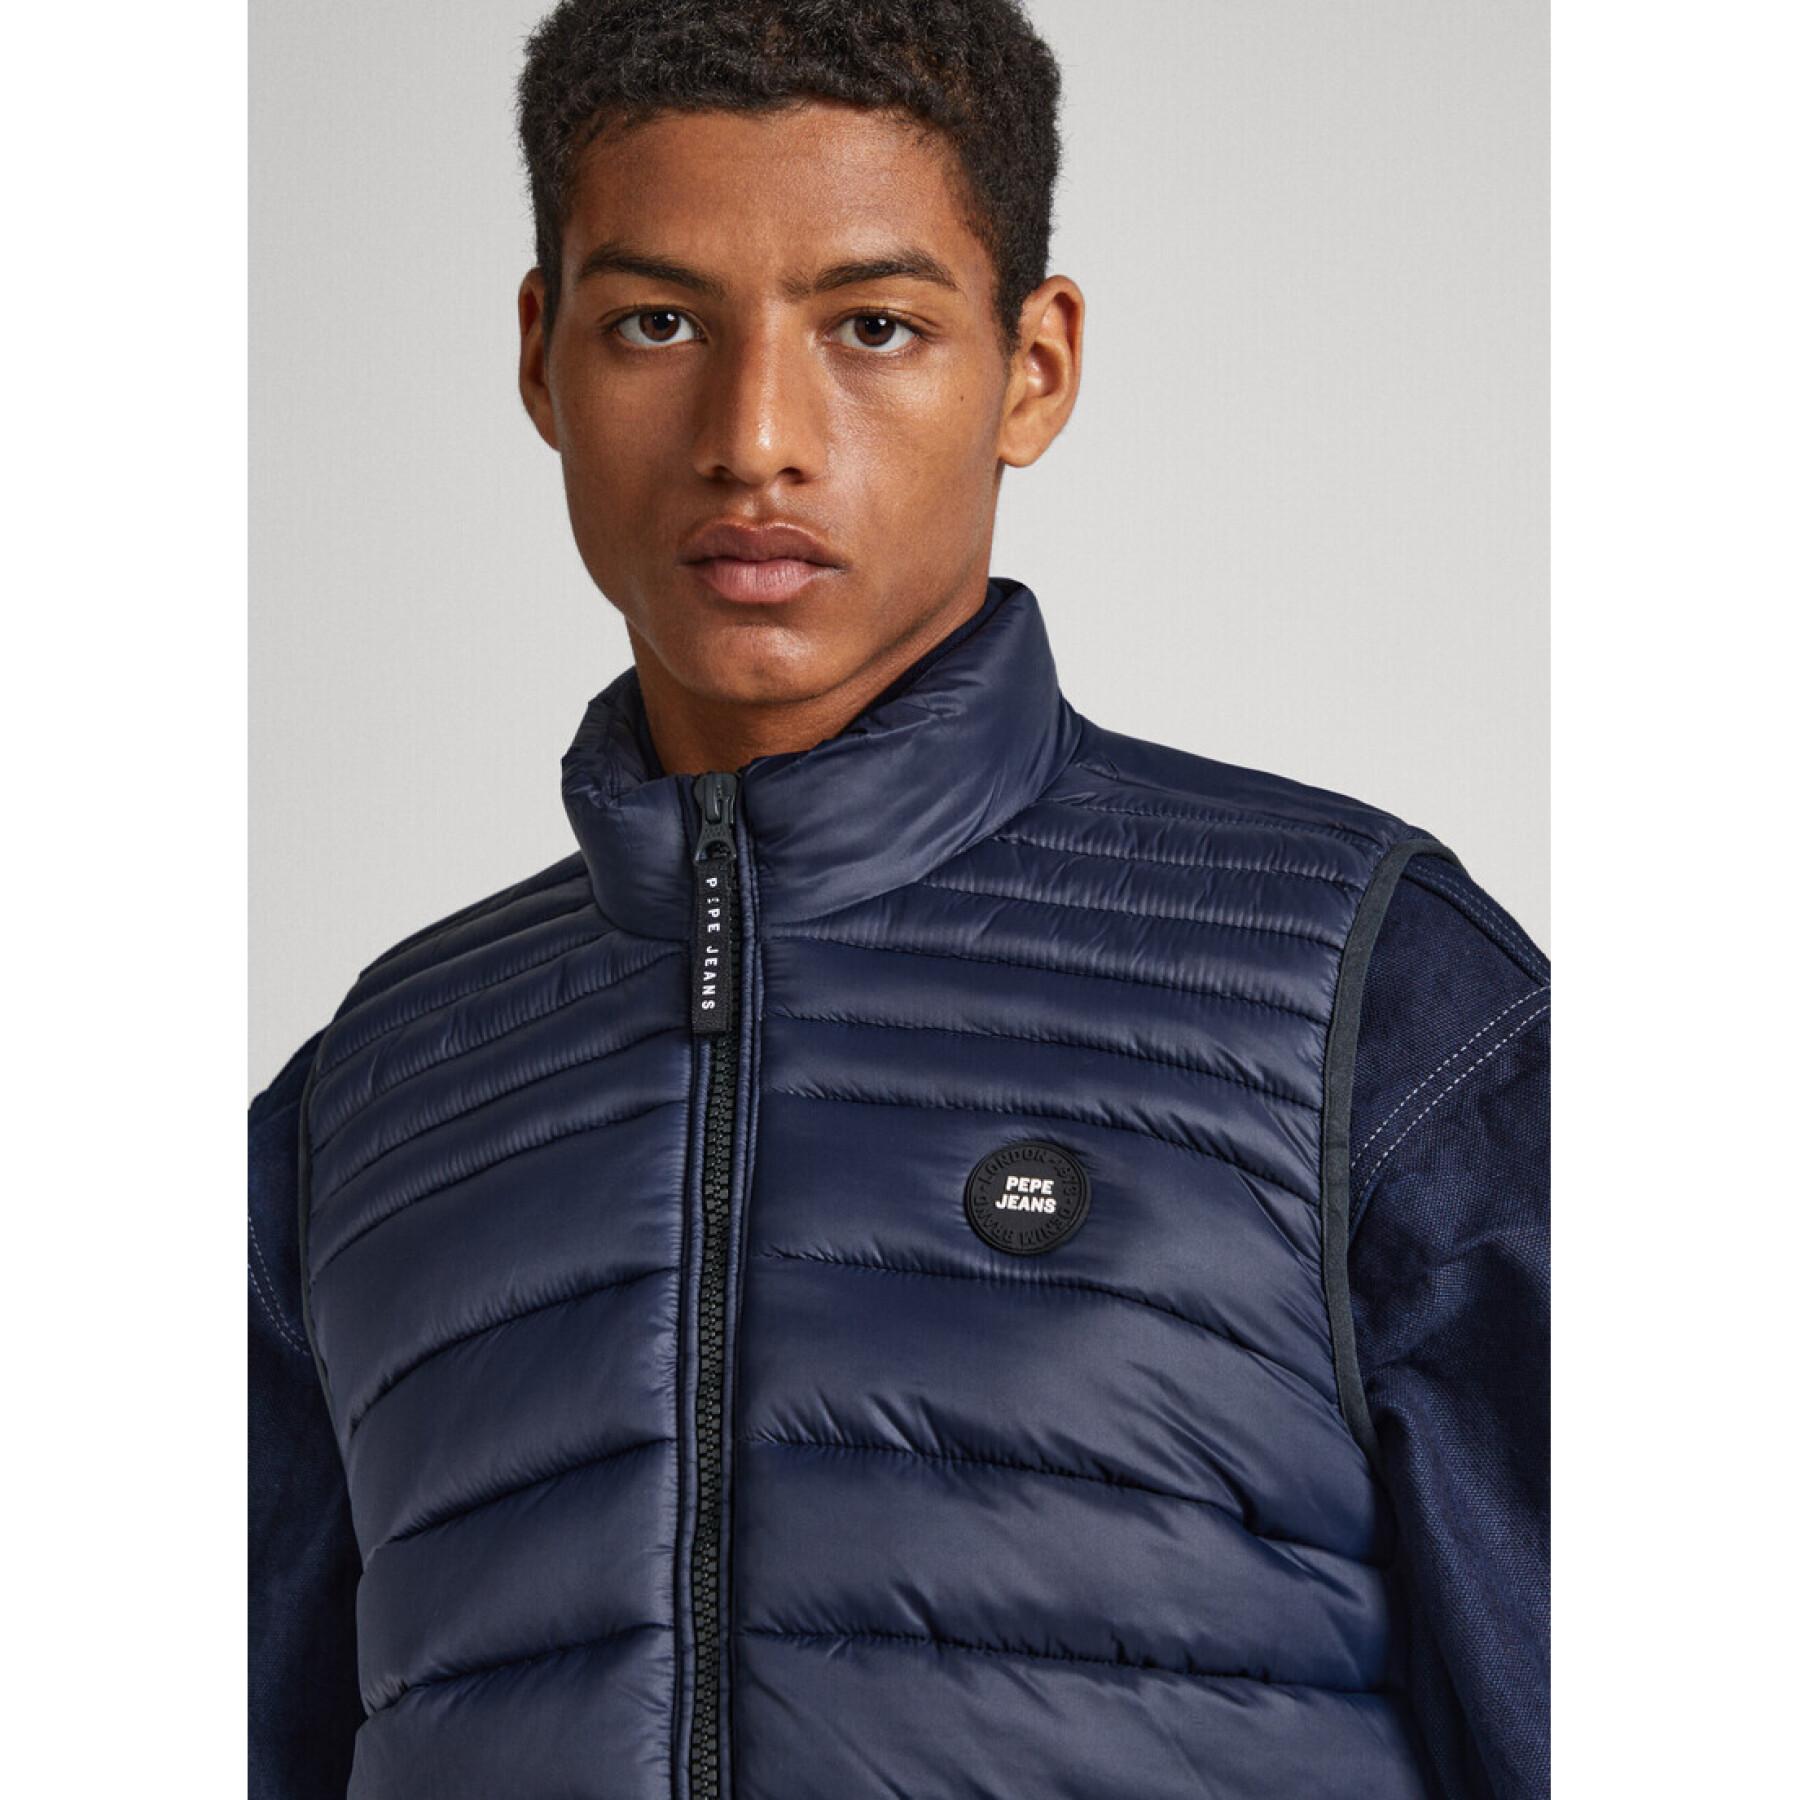 Mouwloos donsjack Pepe Jeans Balle